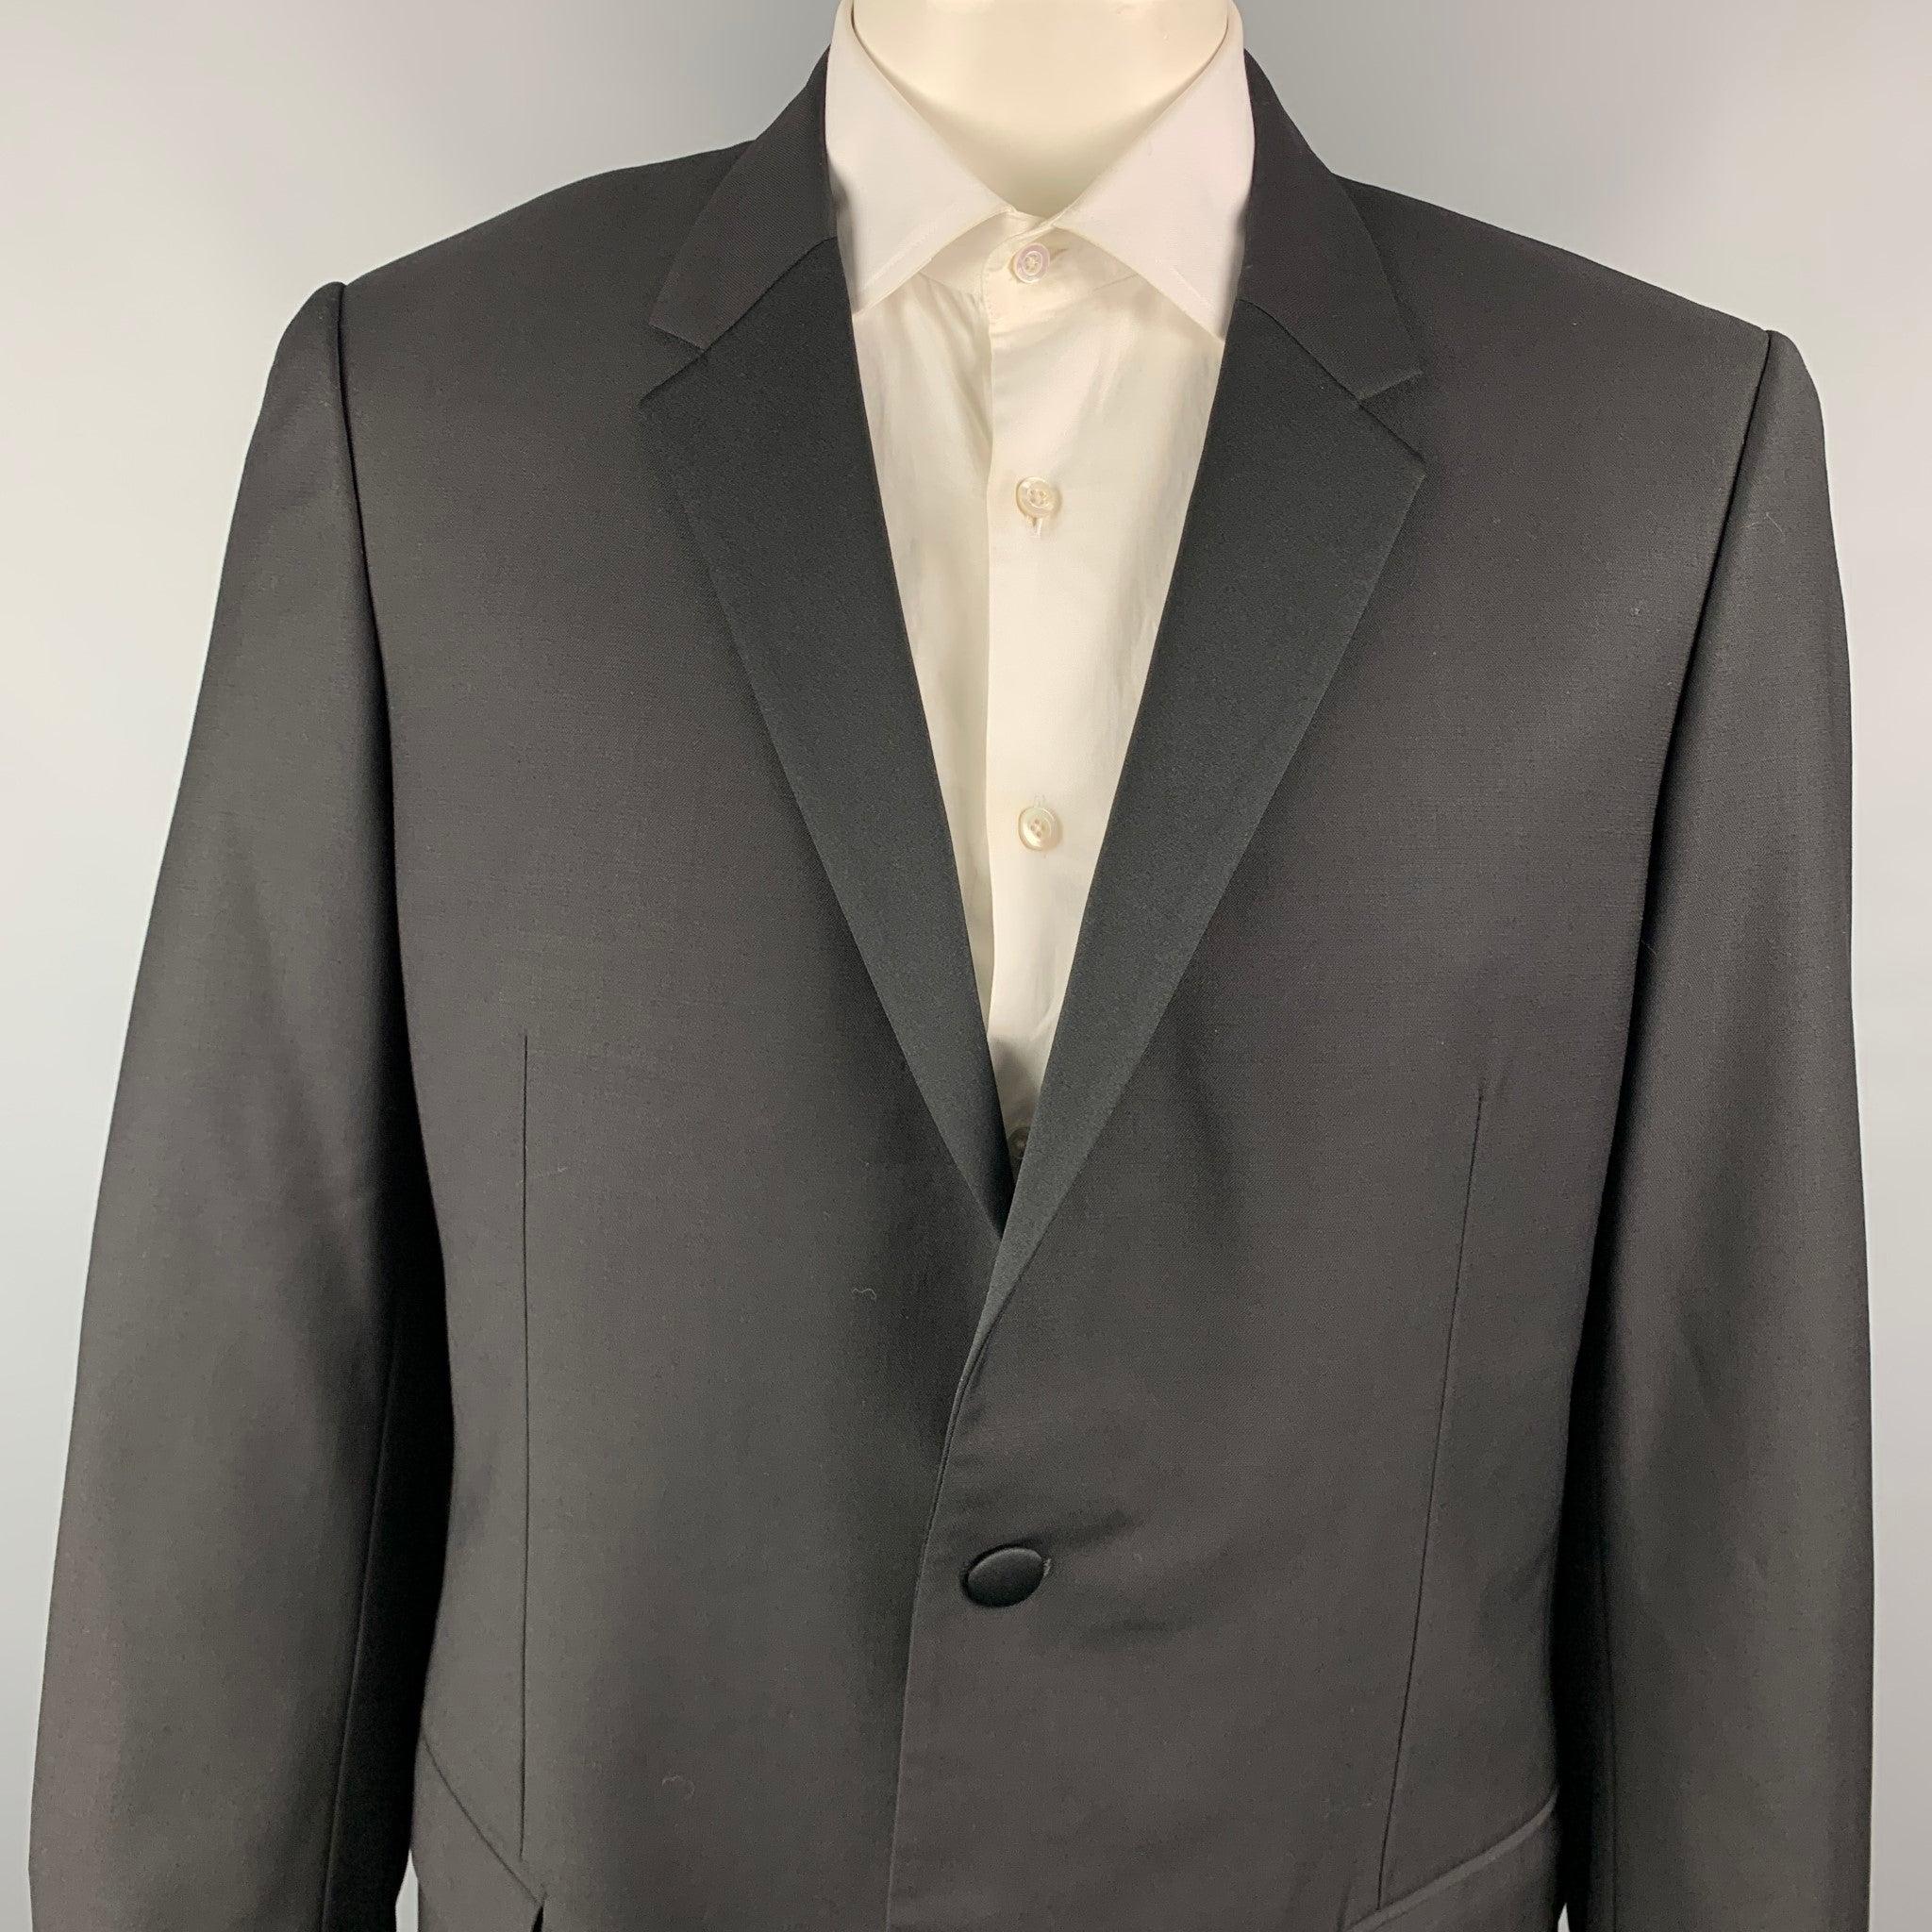 CALVIN KLEIN COLLECTION tuxedo sport coat comes in a black wool with a full liner featuring a notch lapel, flap pockets, and a double button closure. Very Good Pre-Owned Condition. 

Marked:   44/54 

Measurements: 
 
Shoulder: 19 inches  Chest: 44